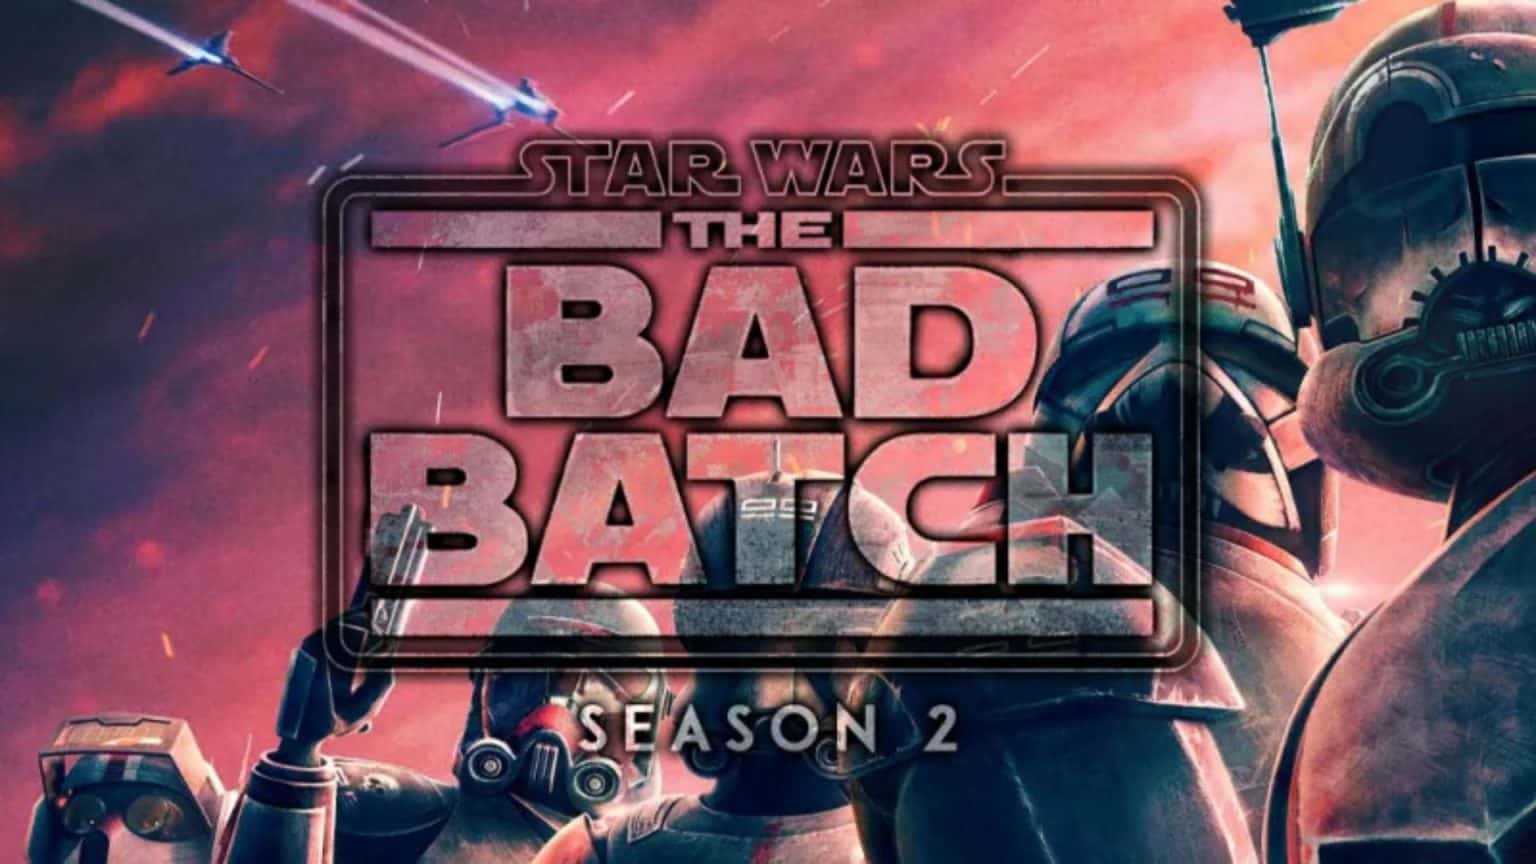 Star Wars The Bad Batch Season 2 Episodes 1 And 2 Release Date Spoilers And Streaming Guide